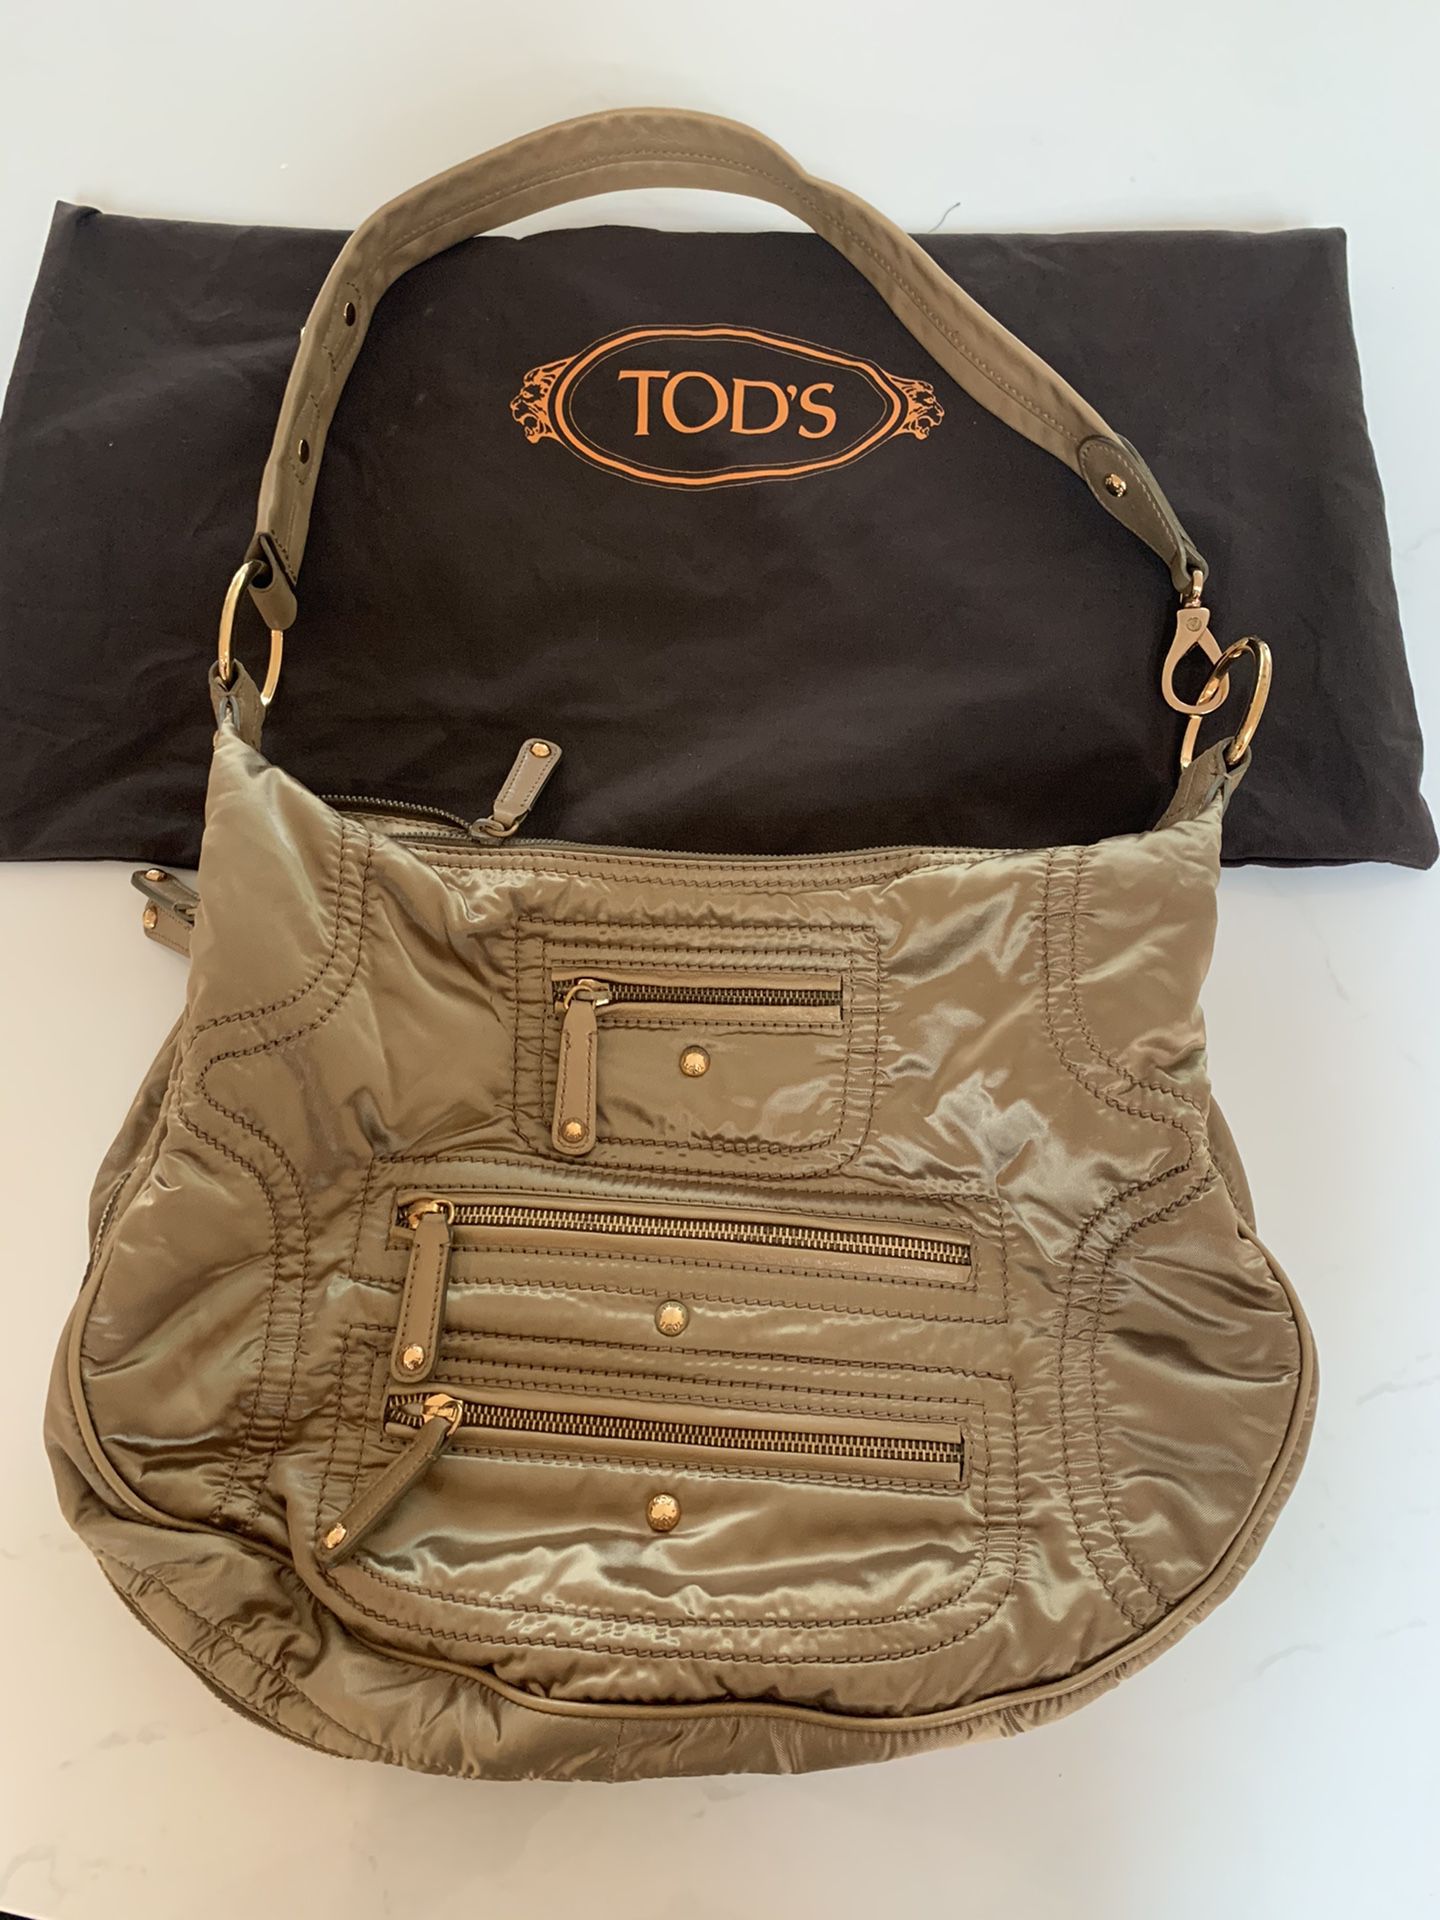 Tod’s Lightweight Purse - authentic